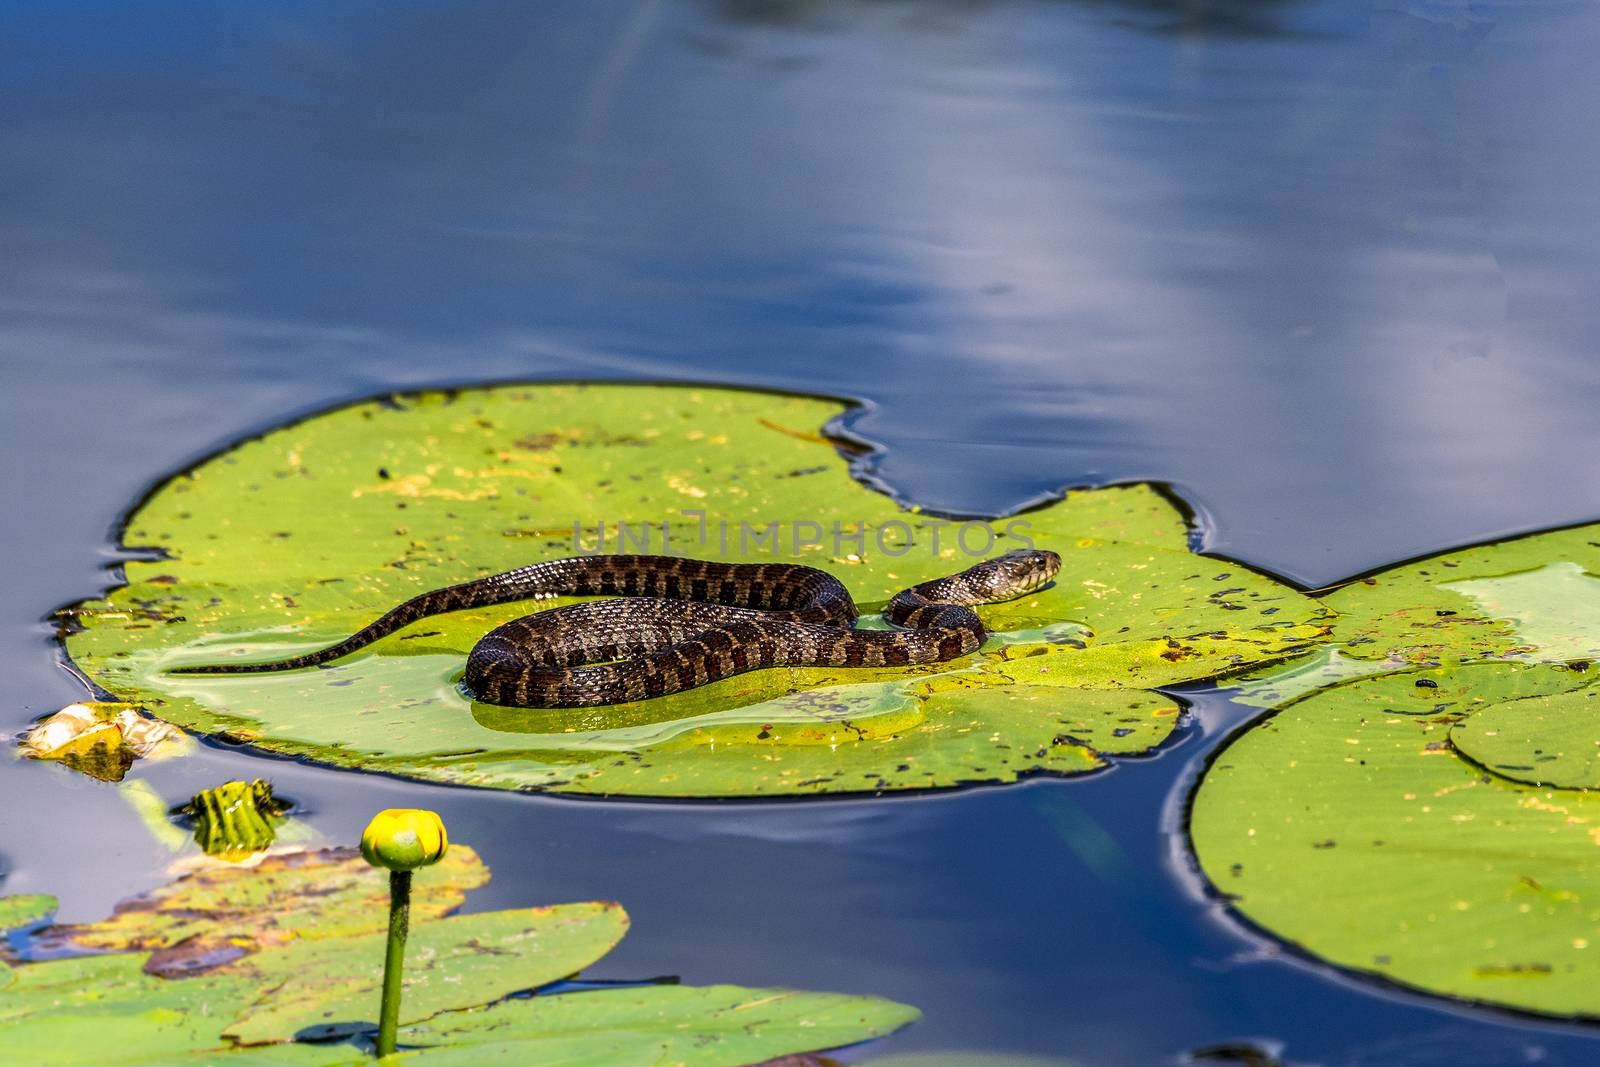 The snake is basking in the sun lying on a water lily leaf by ben44